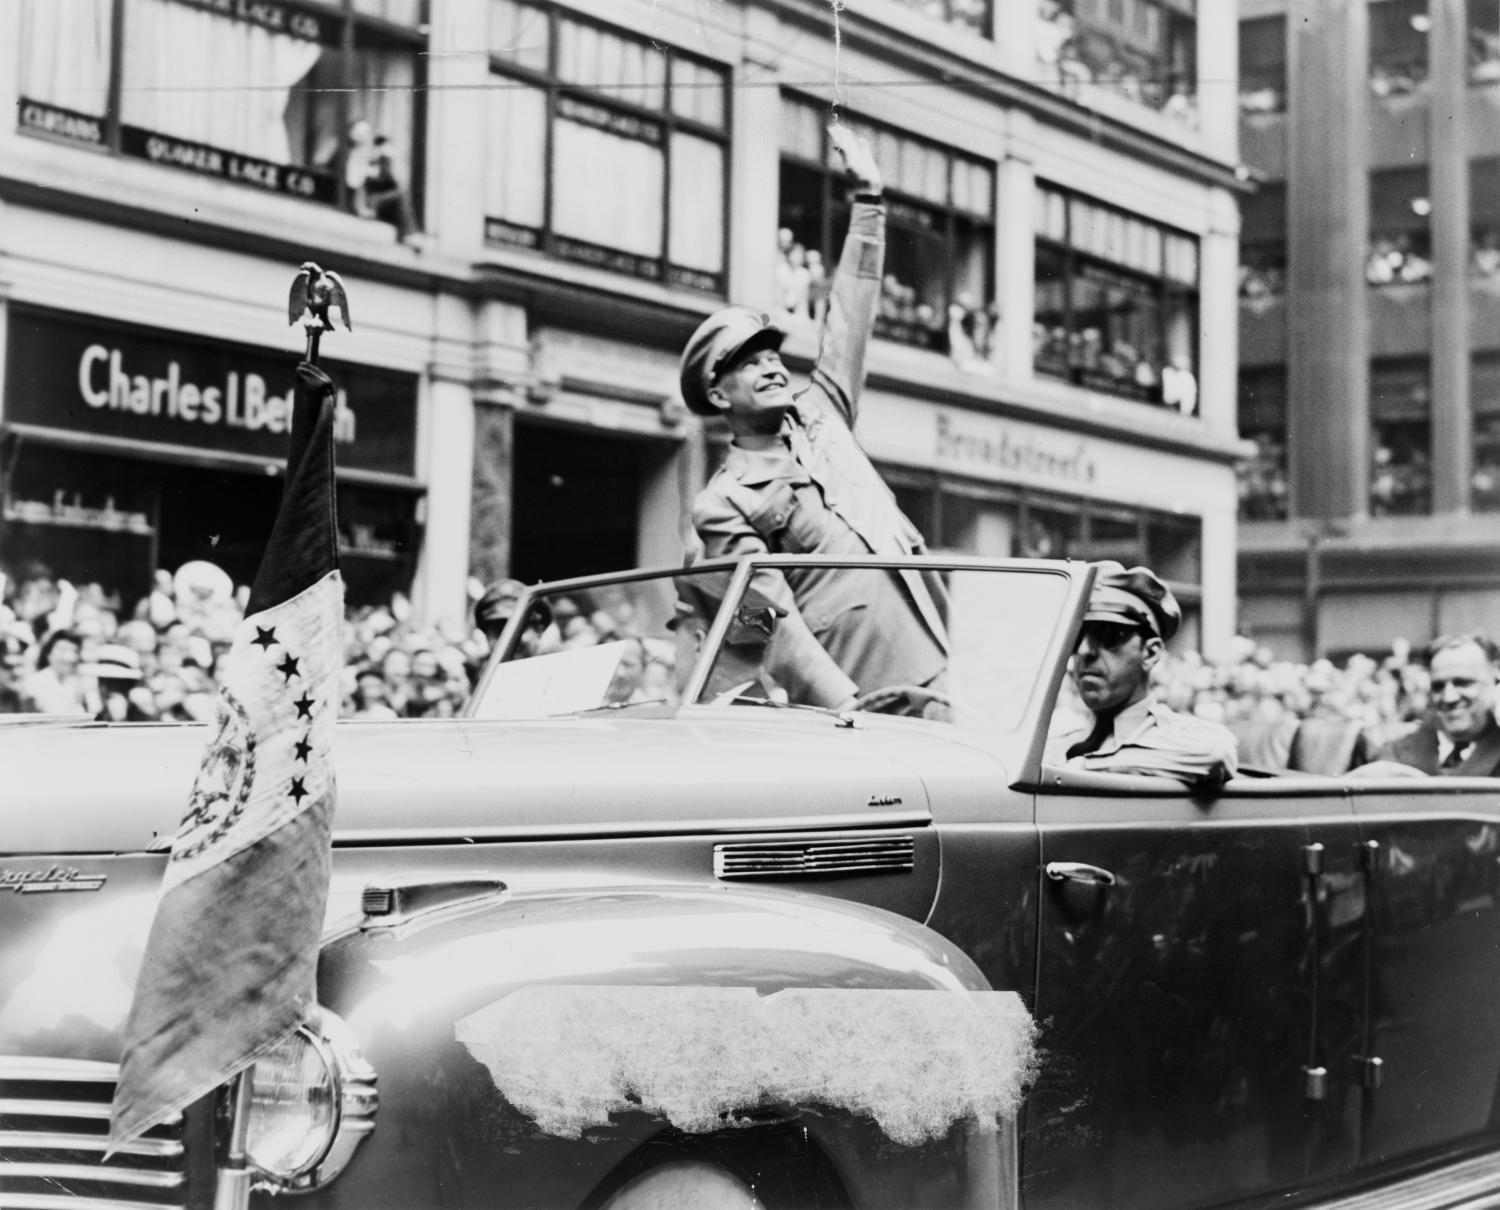 General Dwight Eisenhower waving to the crowd